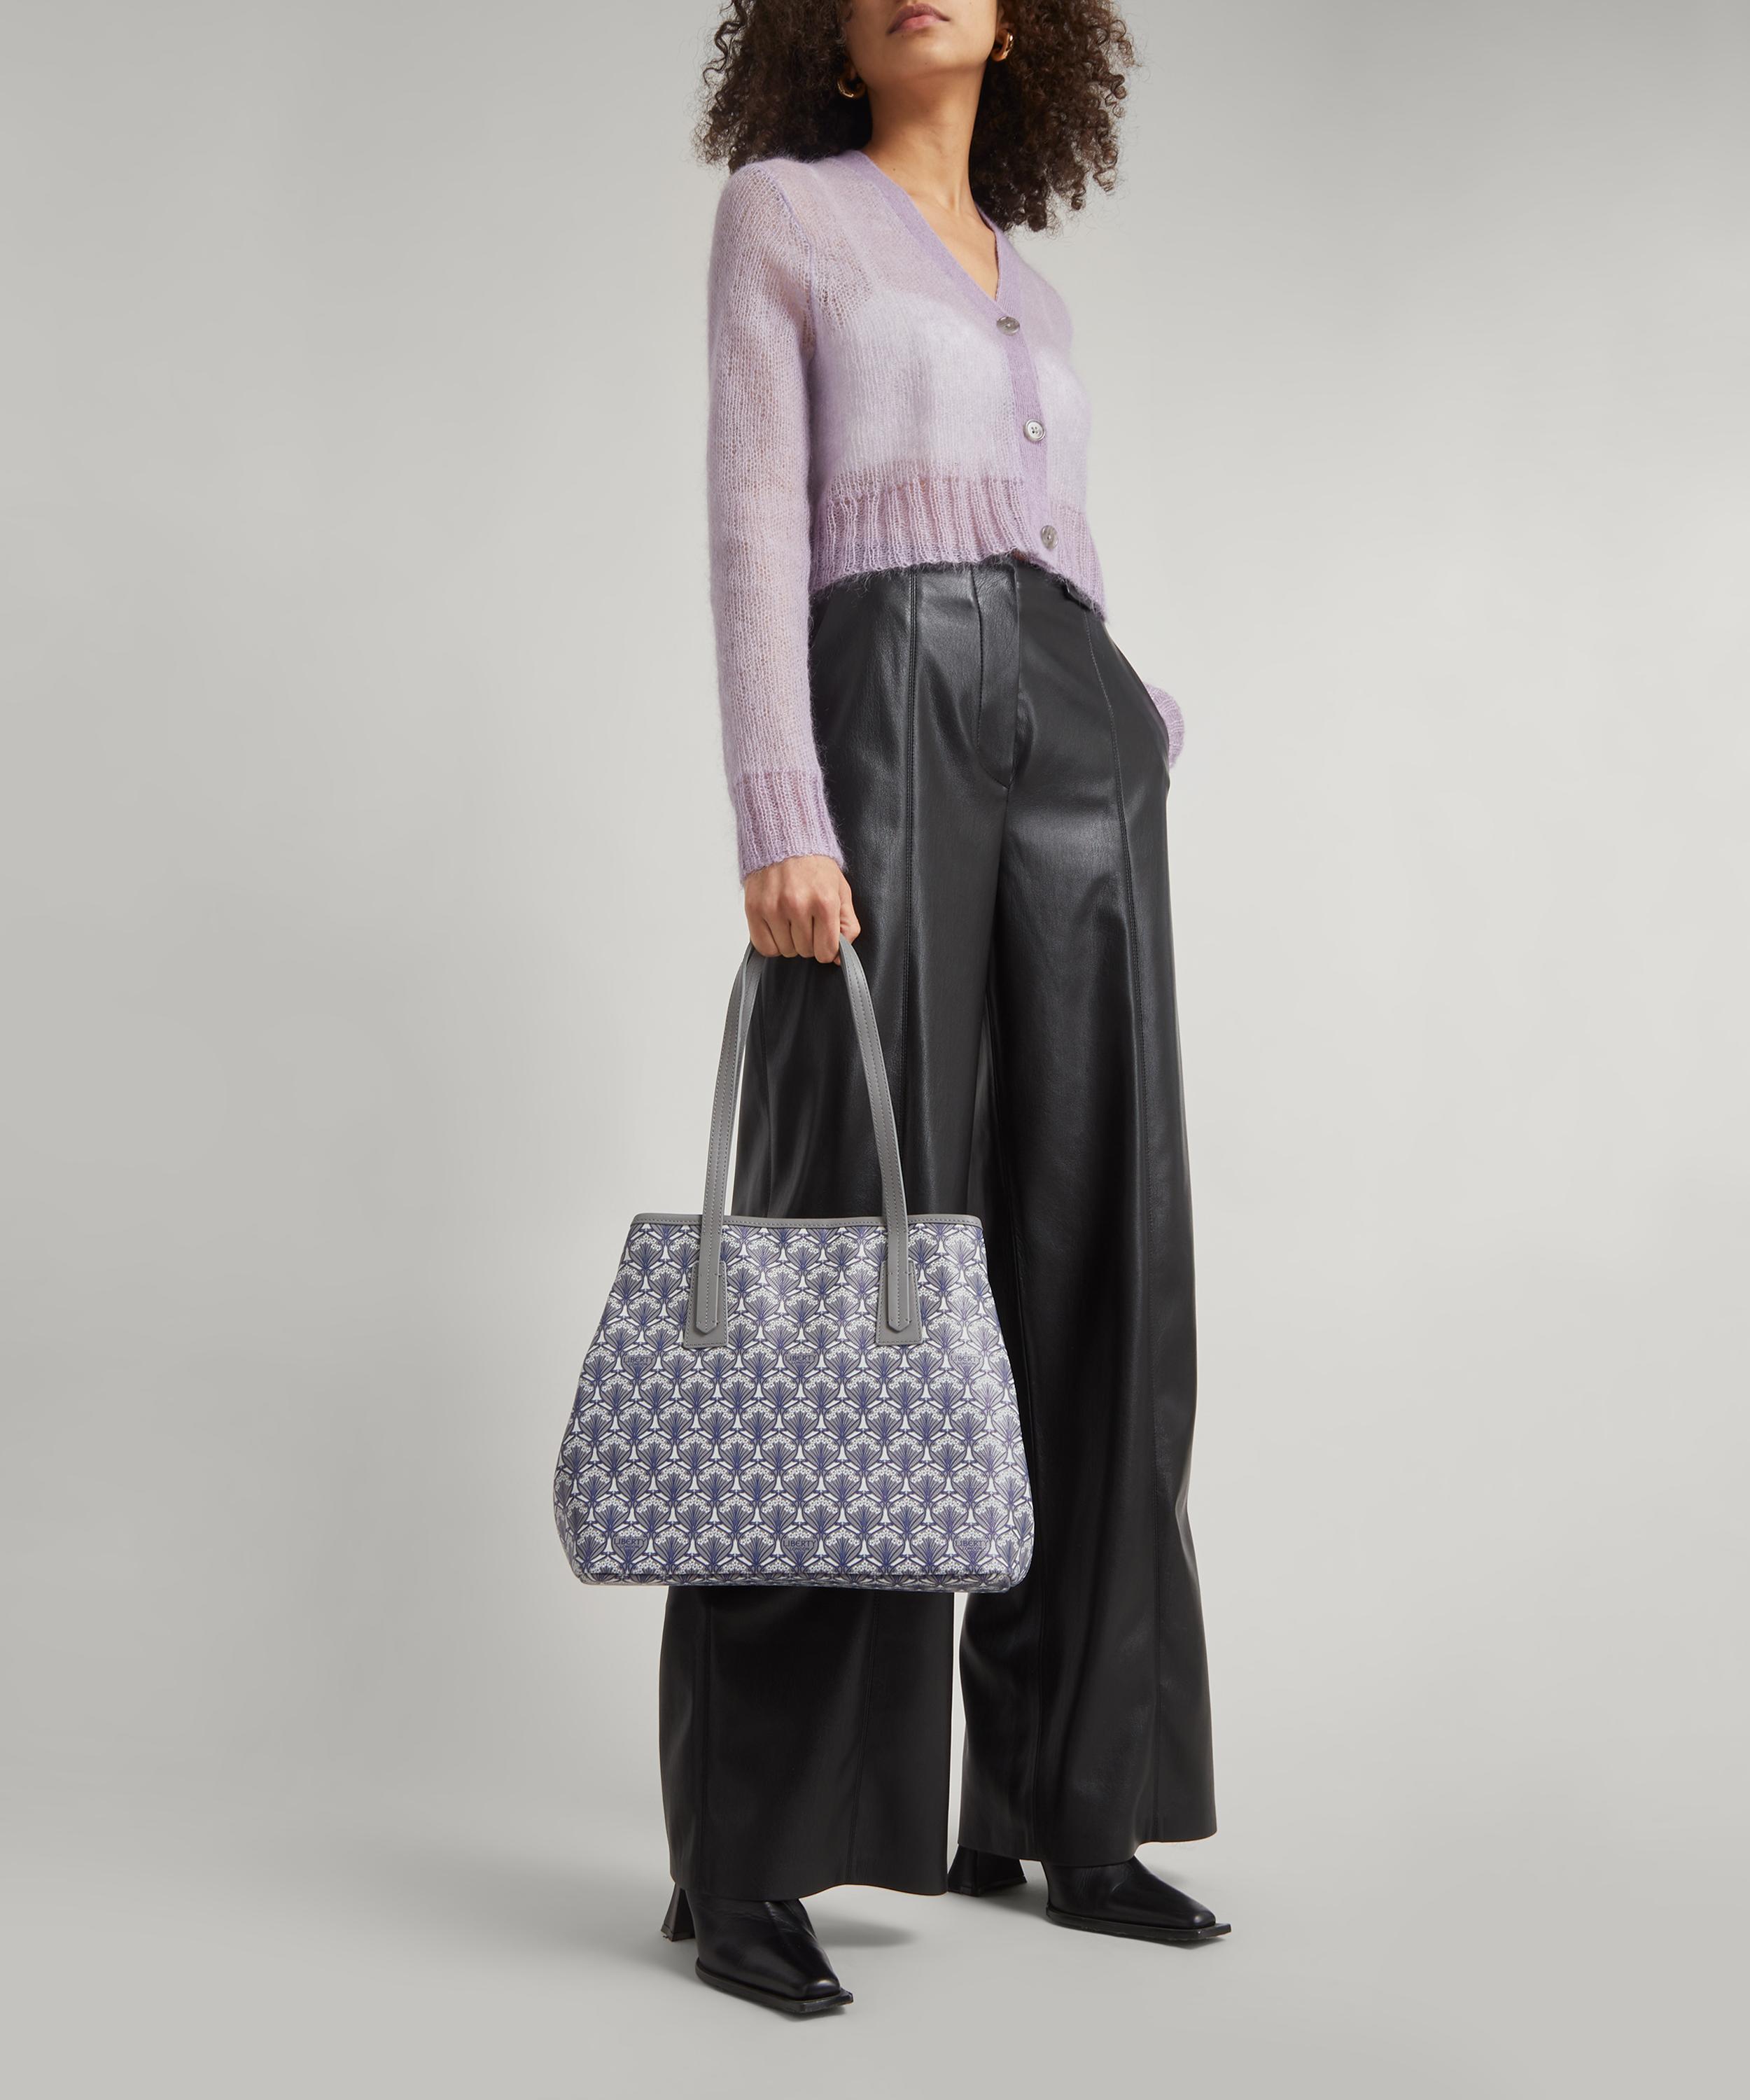 Little Marlborough Tote Bag in Iphis Canvas | Liberty London